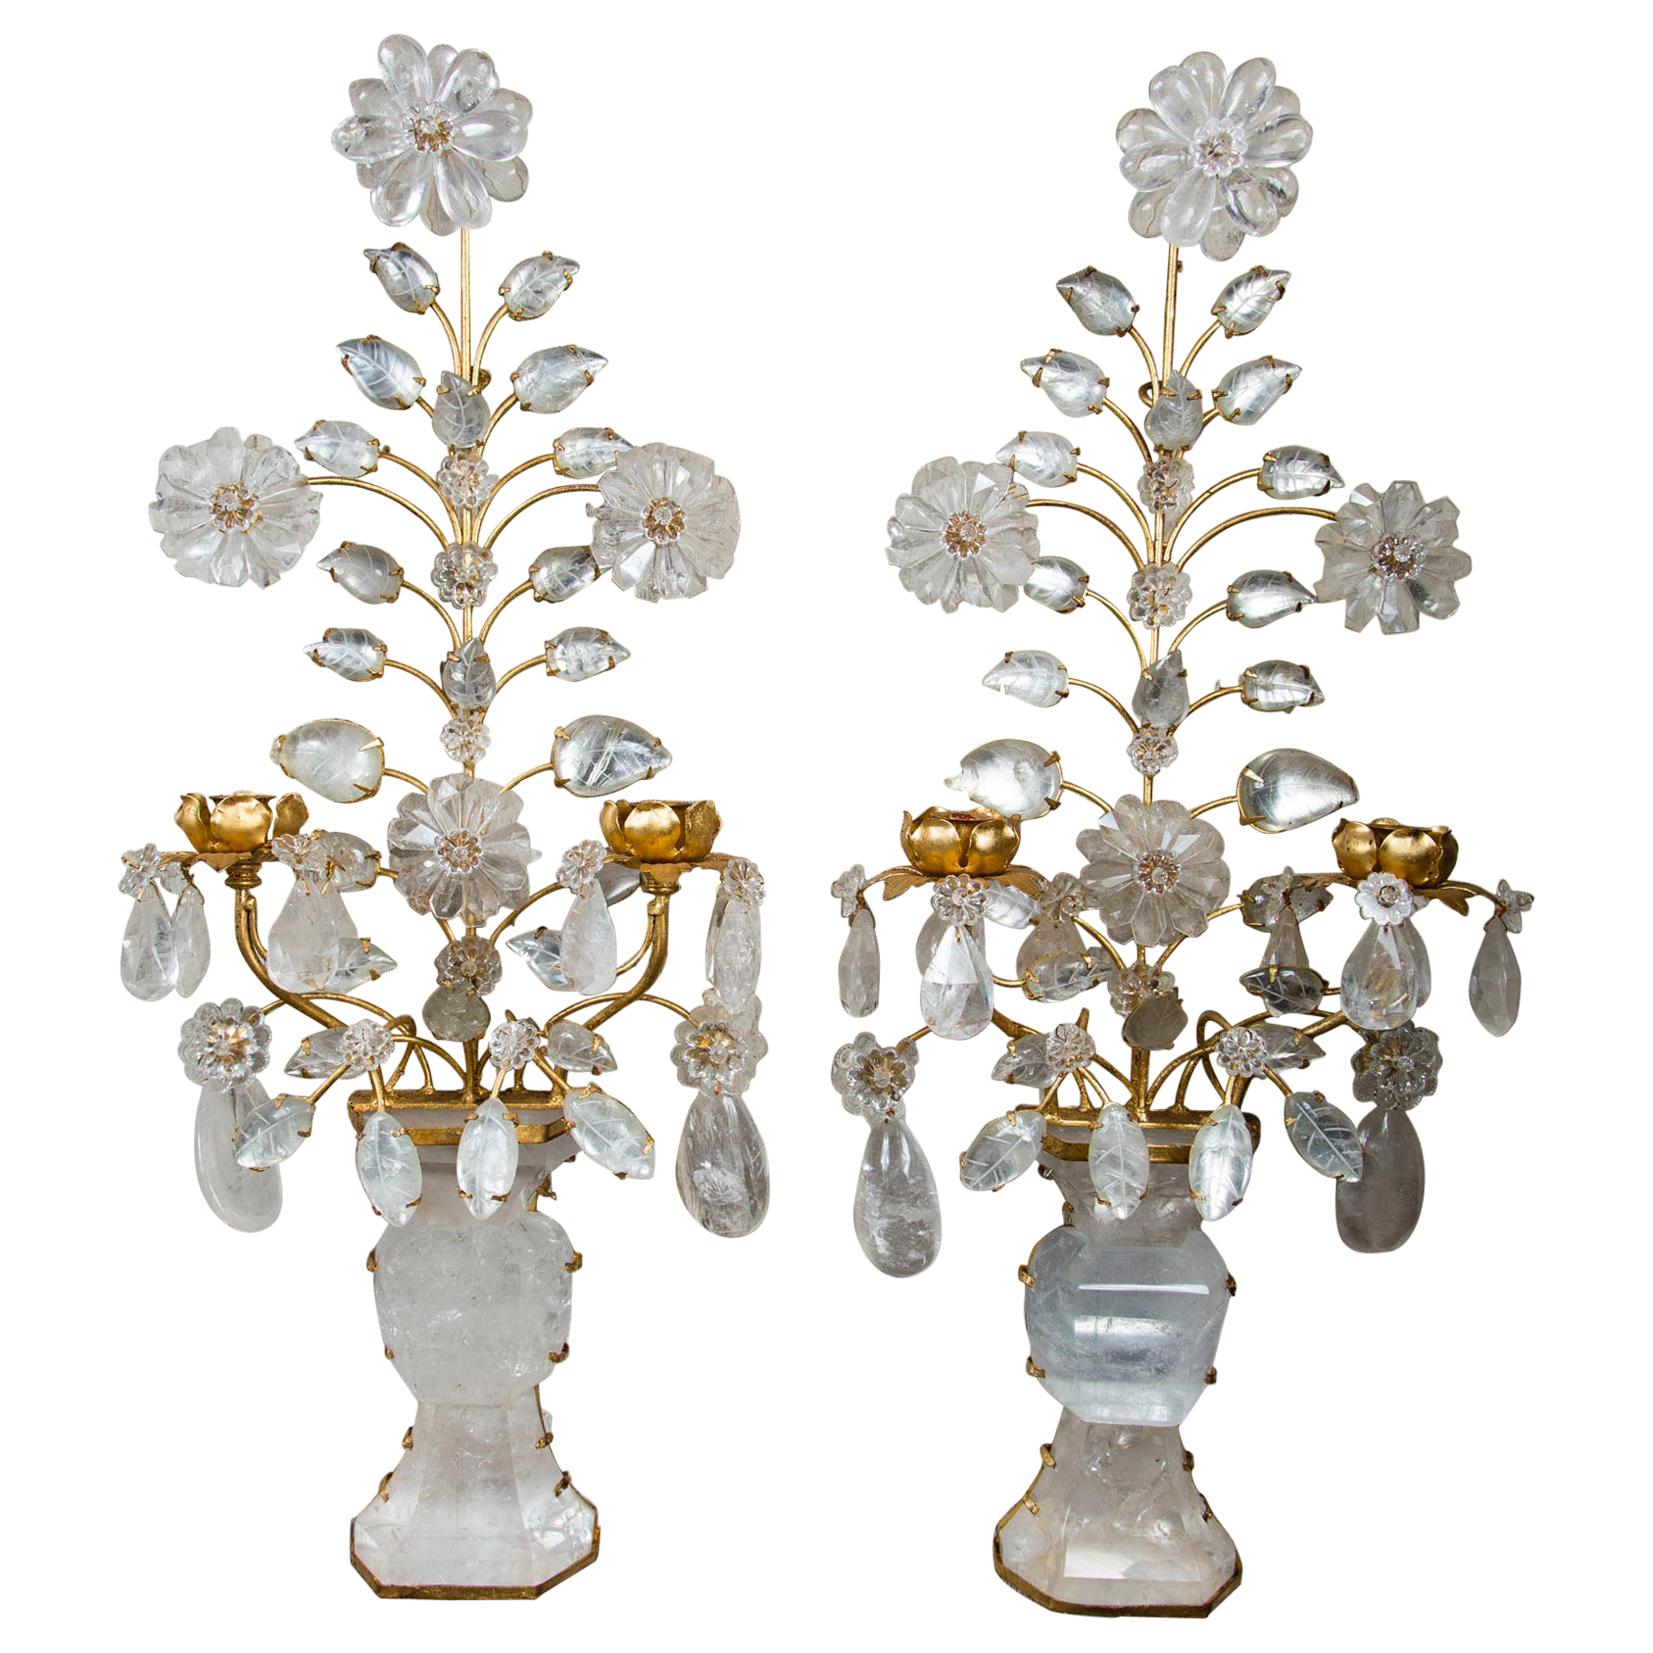 Pair of 2-Light Gilt Metal and Rock Crystal Wall Sconces